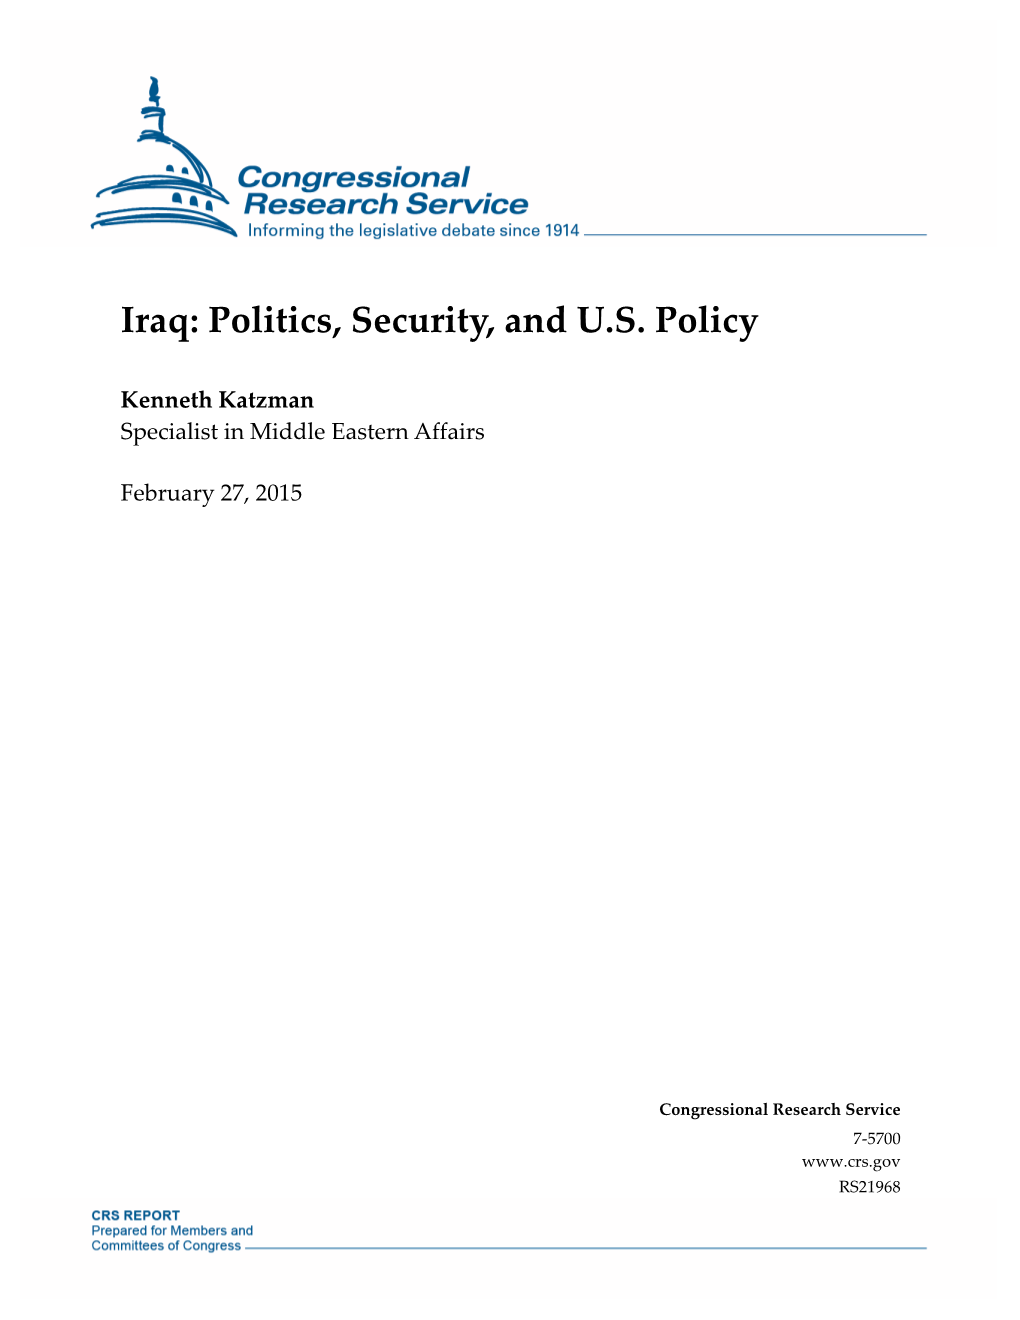 Politics, Security, and US Policy